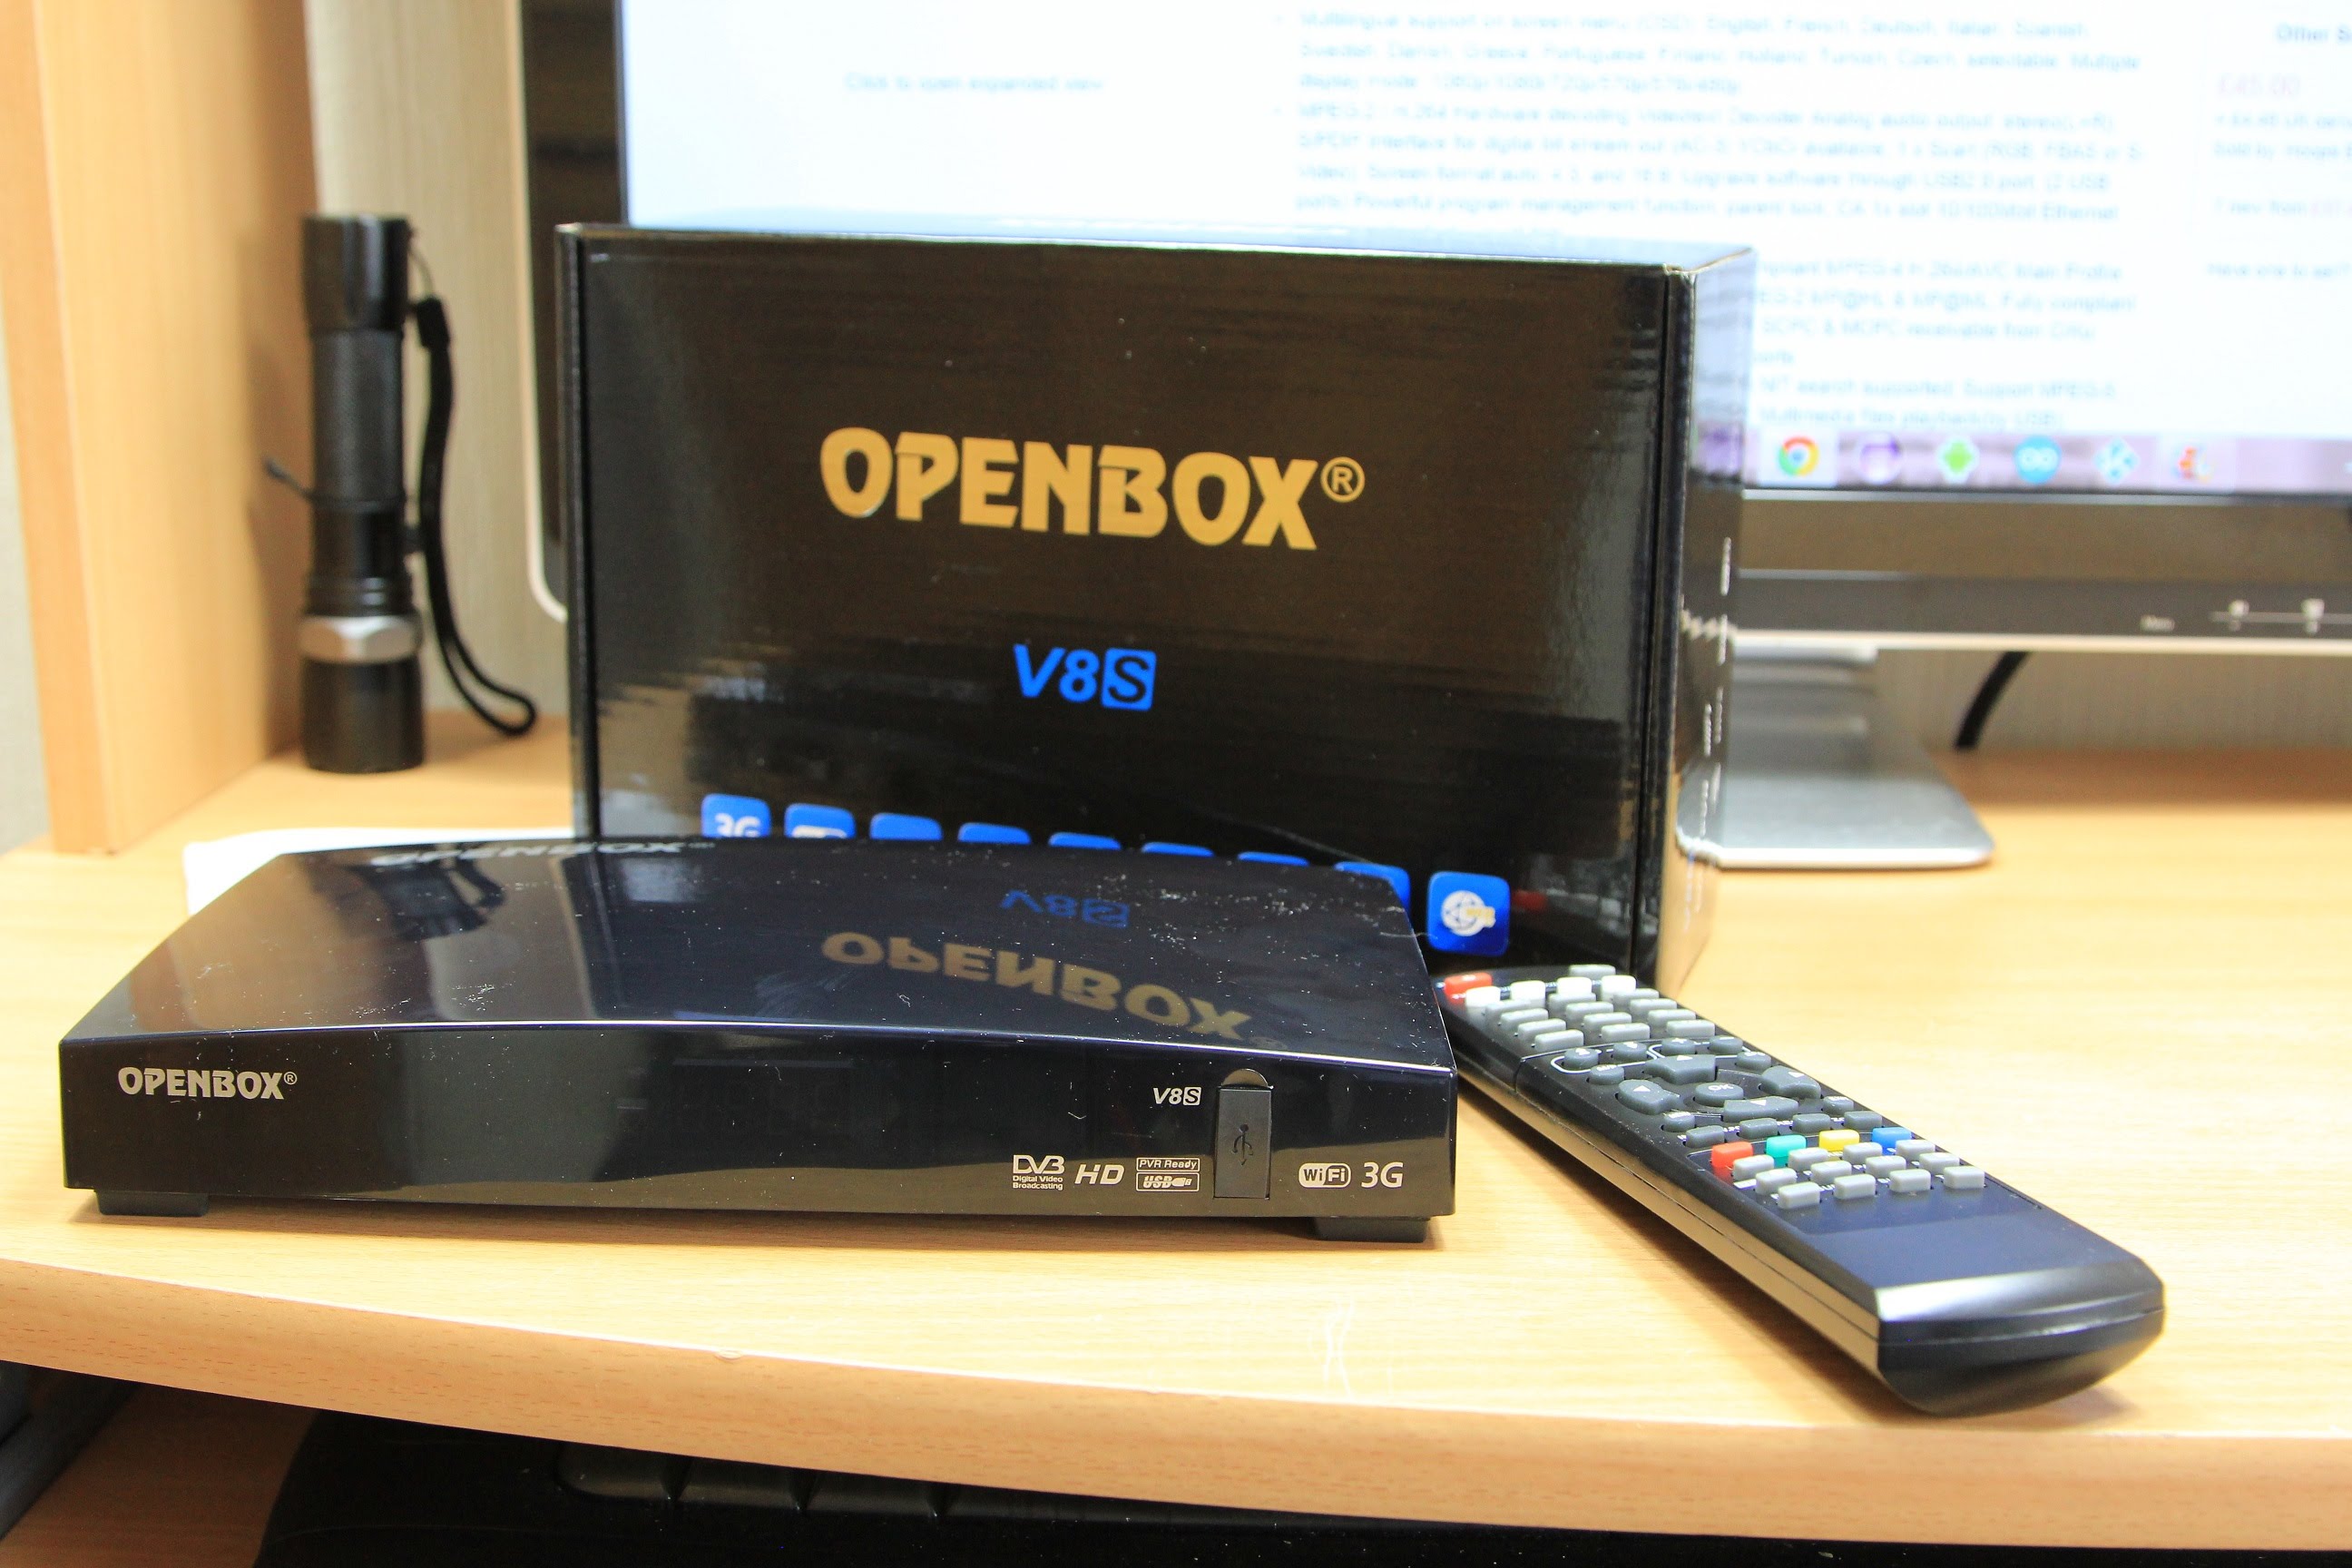 OpenBox Skybox V8S satellite TV box Unboxing and Review - YouTube